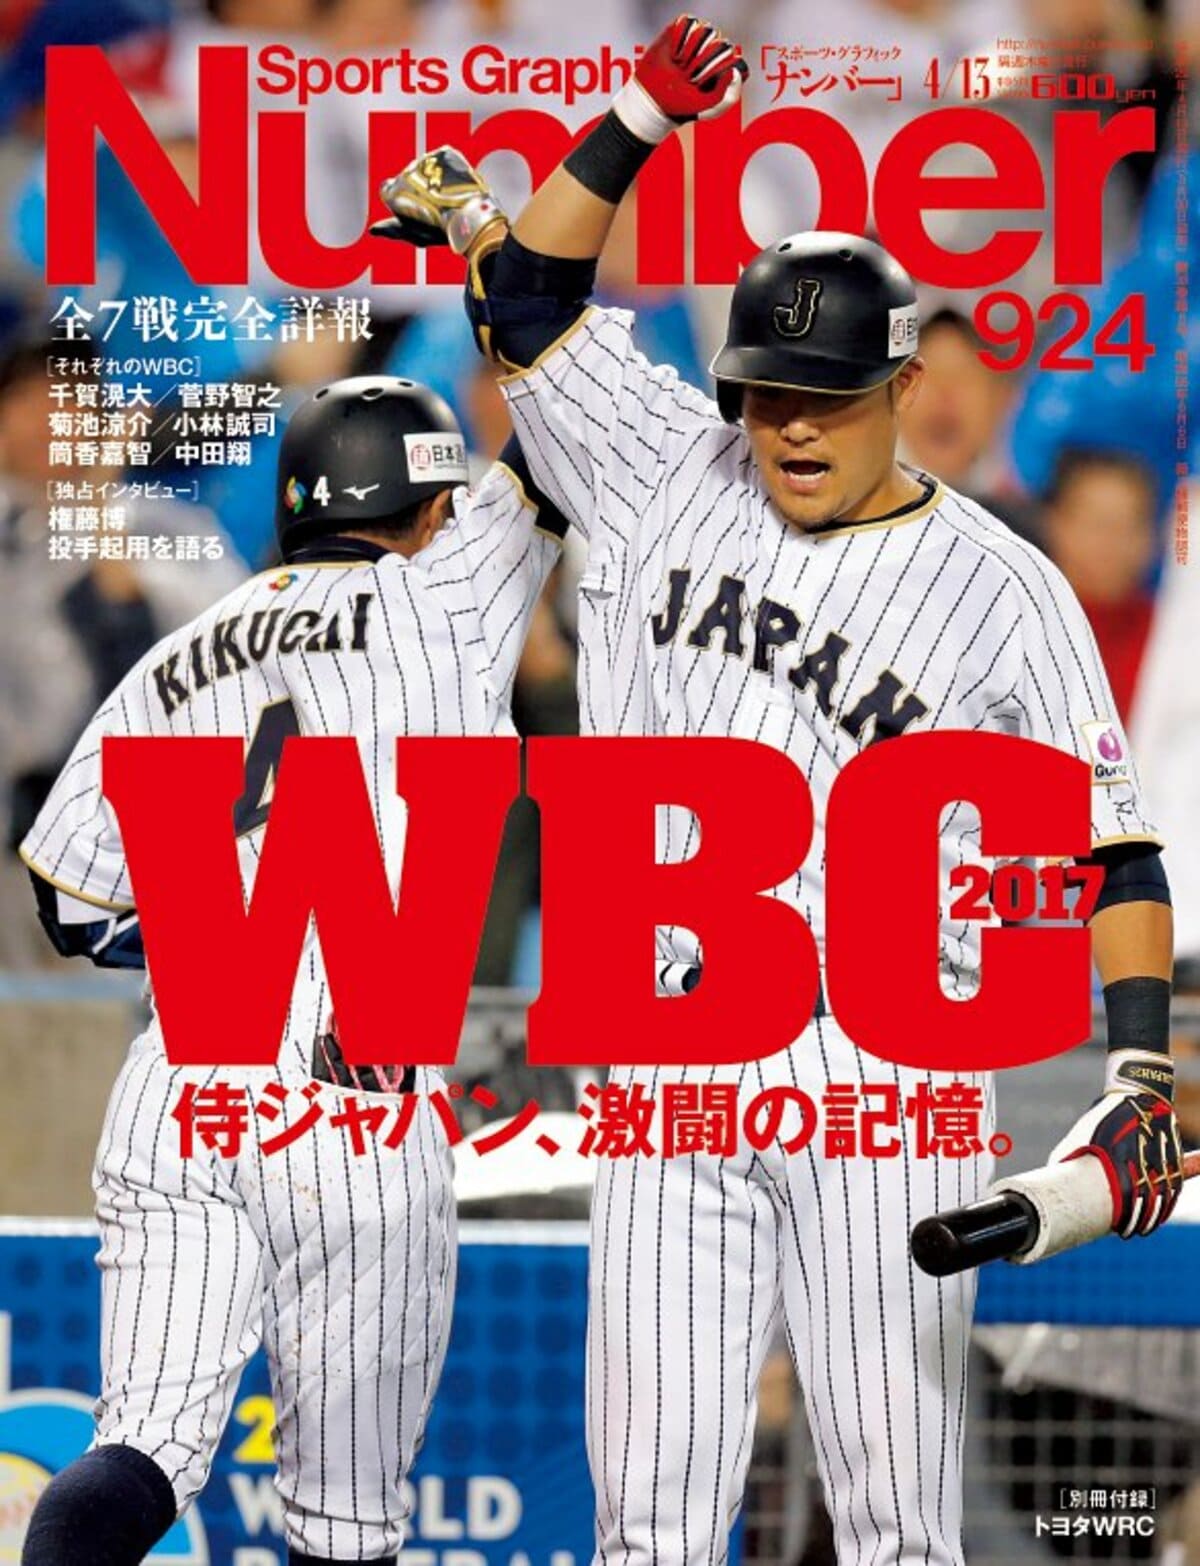 WBC2017＞ 侍ジャパン、激闘の記憶。 - Number924号 - Number Web 